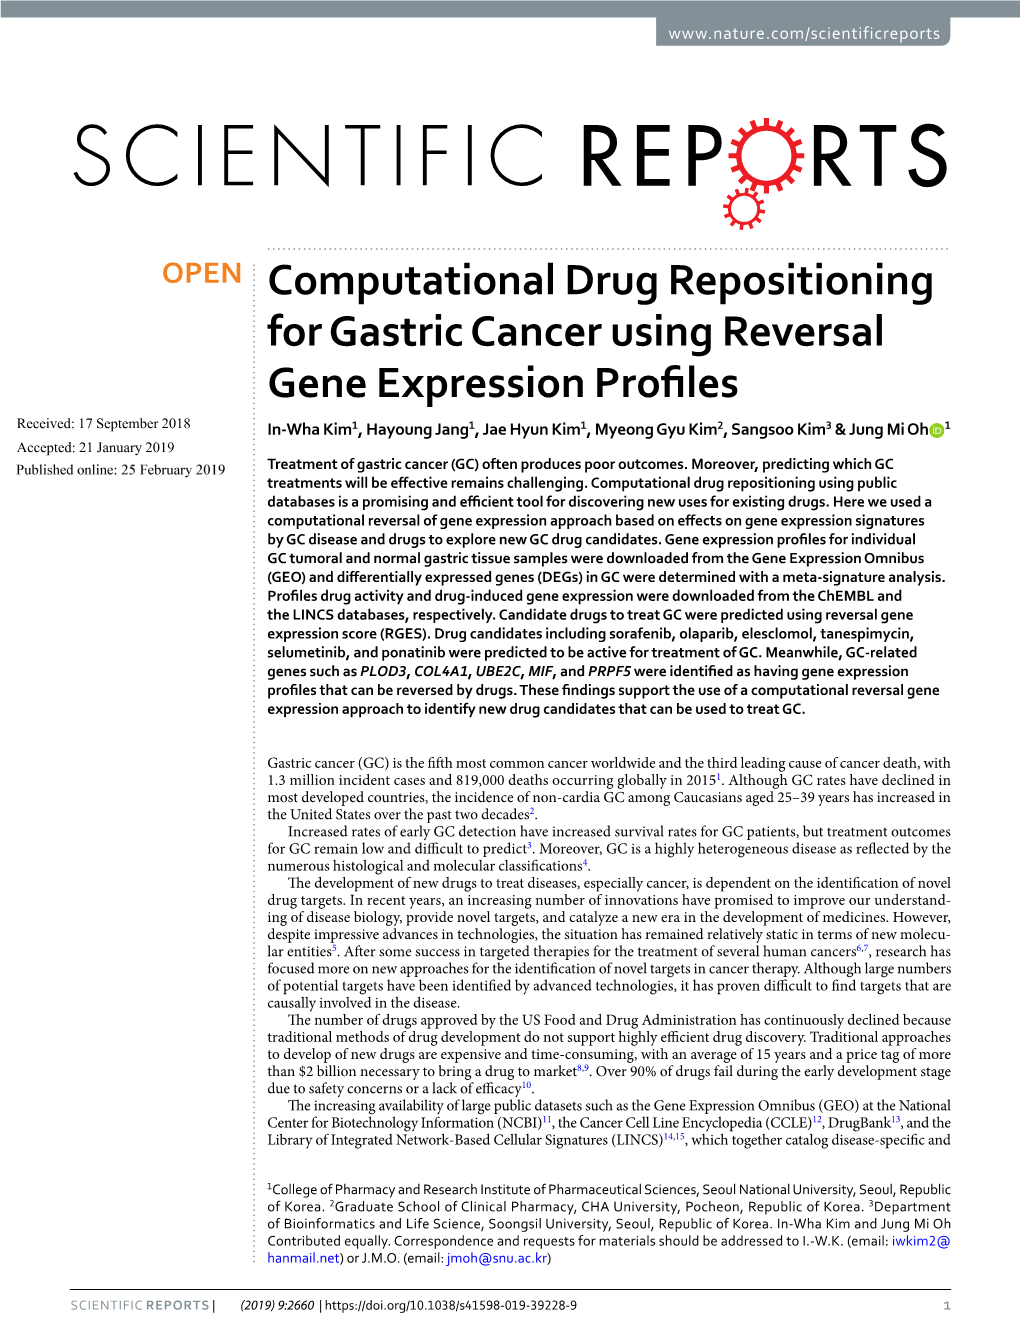 Computational Drug Repositioning for Gastric Cancer Using Reversal